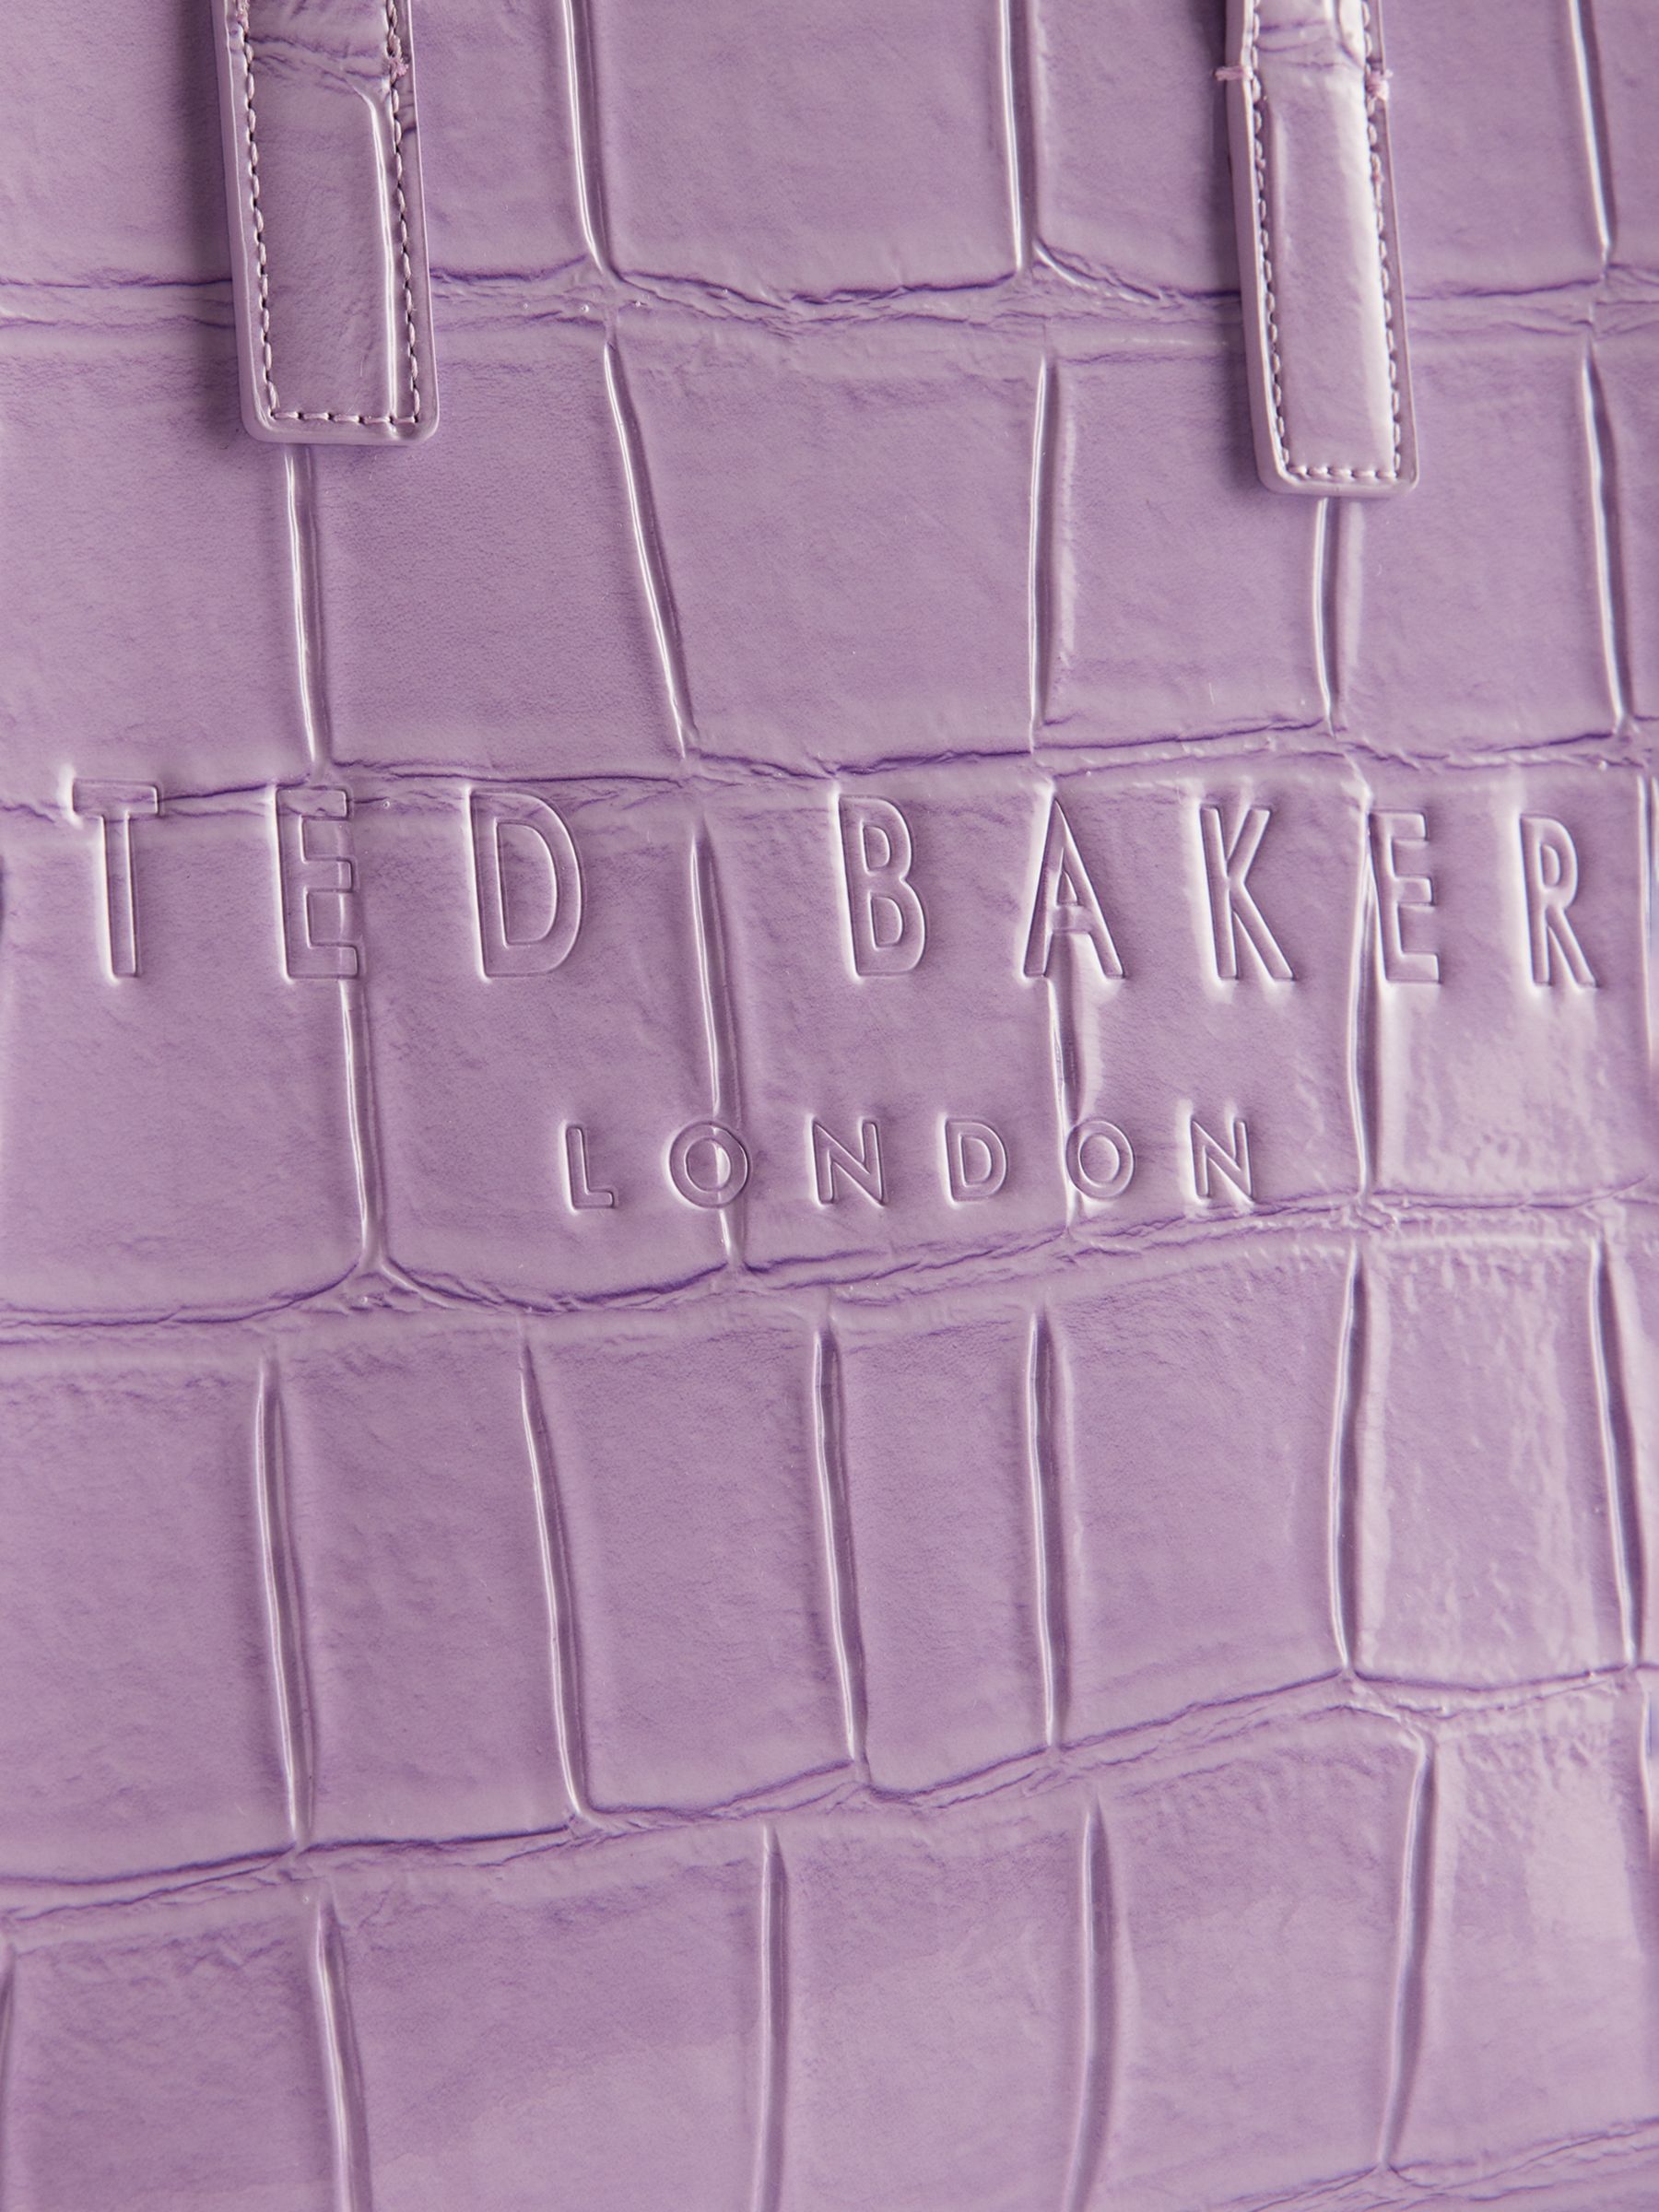 Ted Baker Reptcon Croc Detail Small Icon Shopper Bag, Lilac, One Size